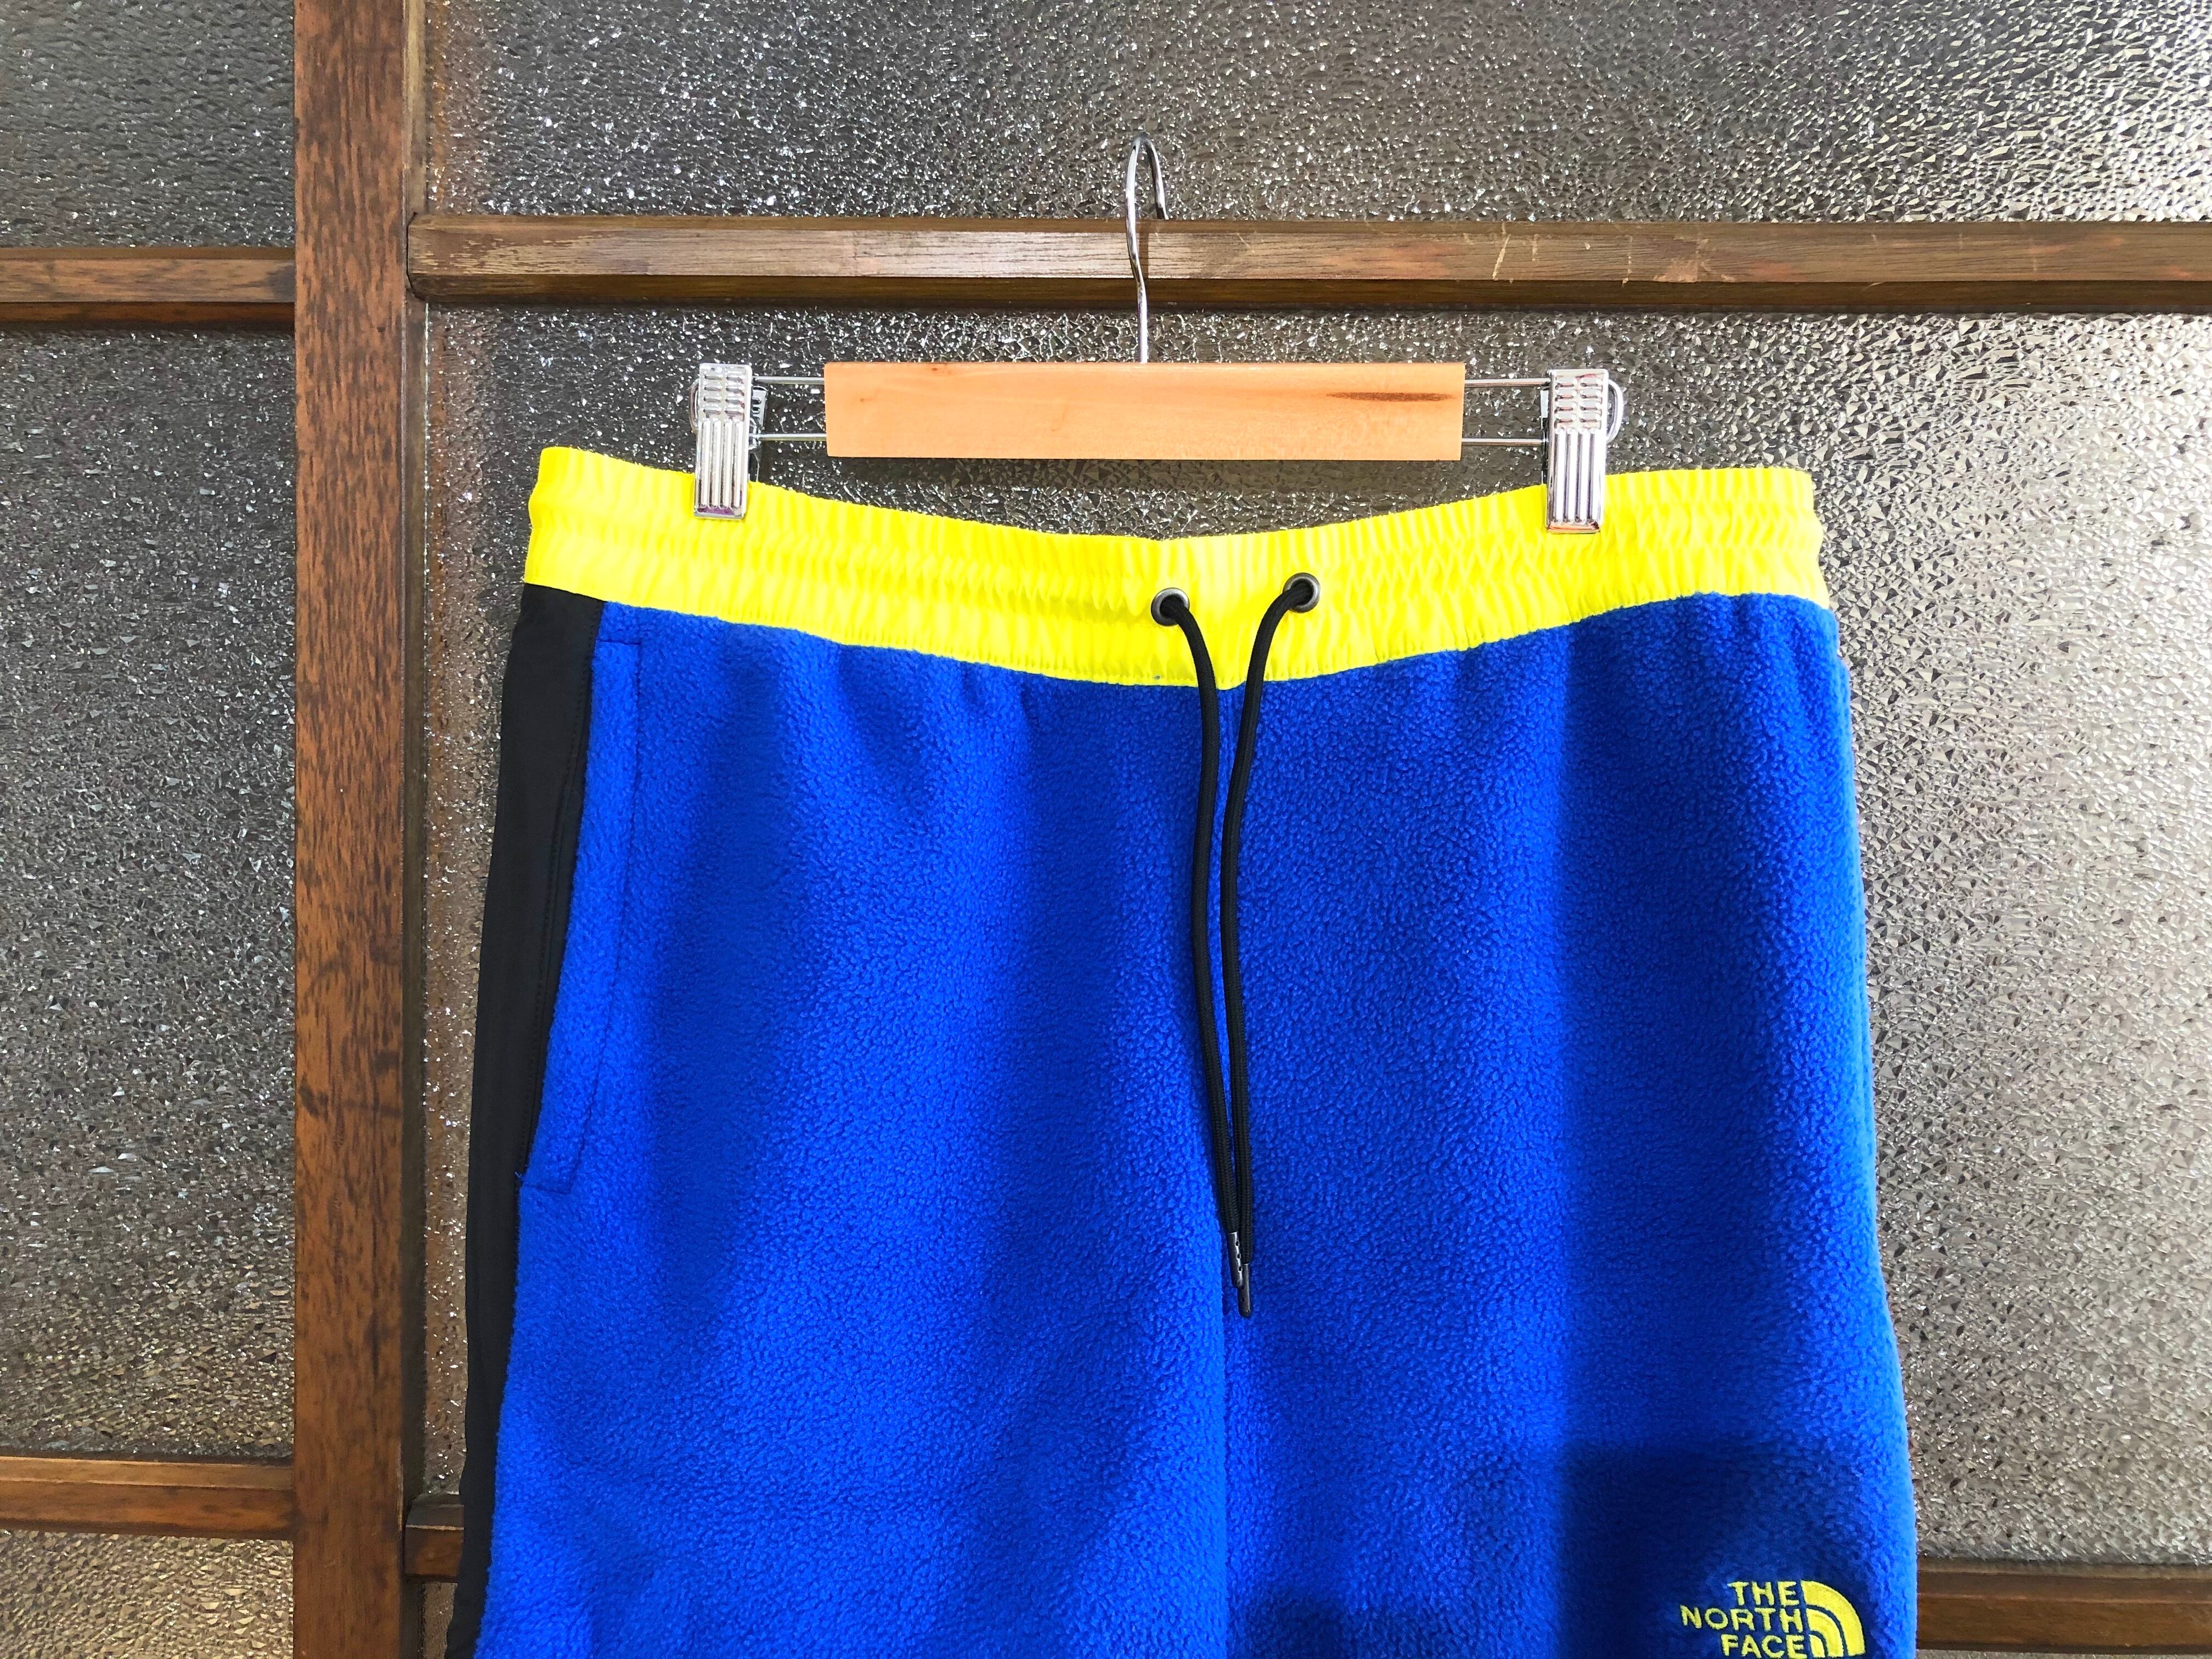 THE NORTH FACE  EXTREME FLEECE PANT TNF BLUE COMBO   "JACK OF